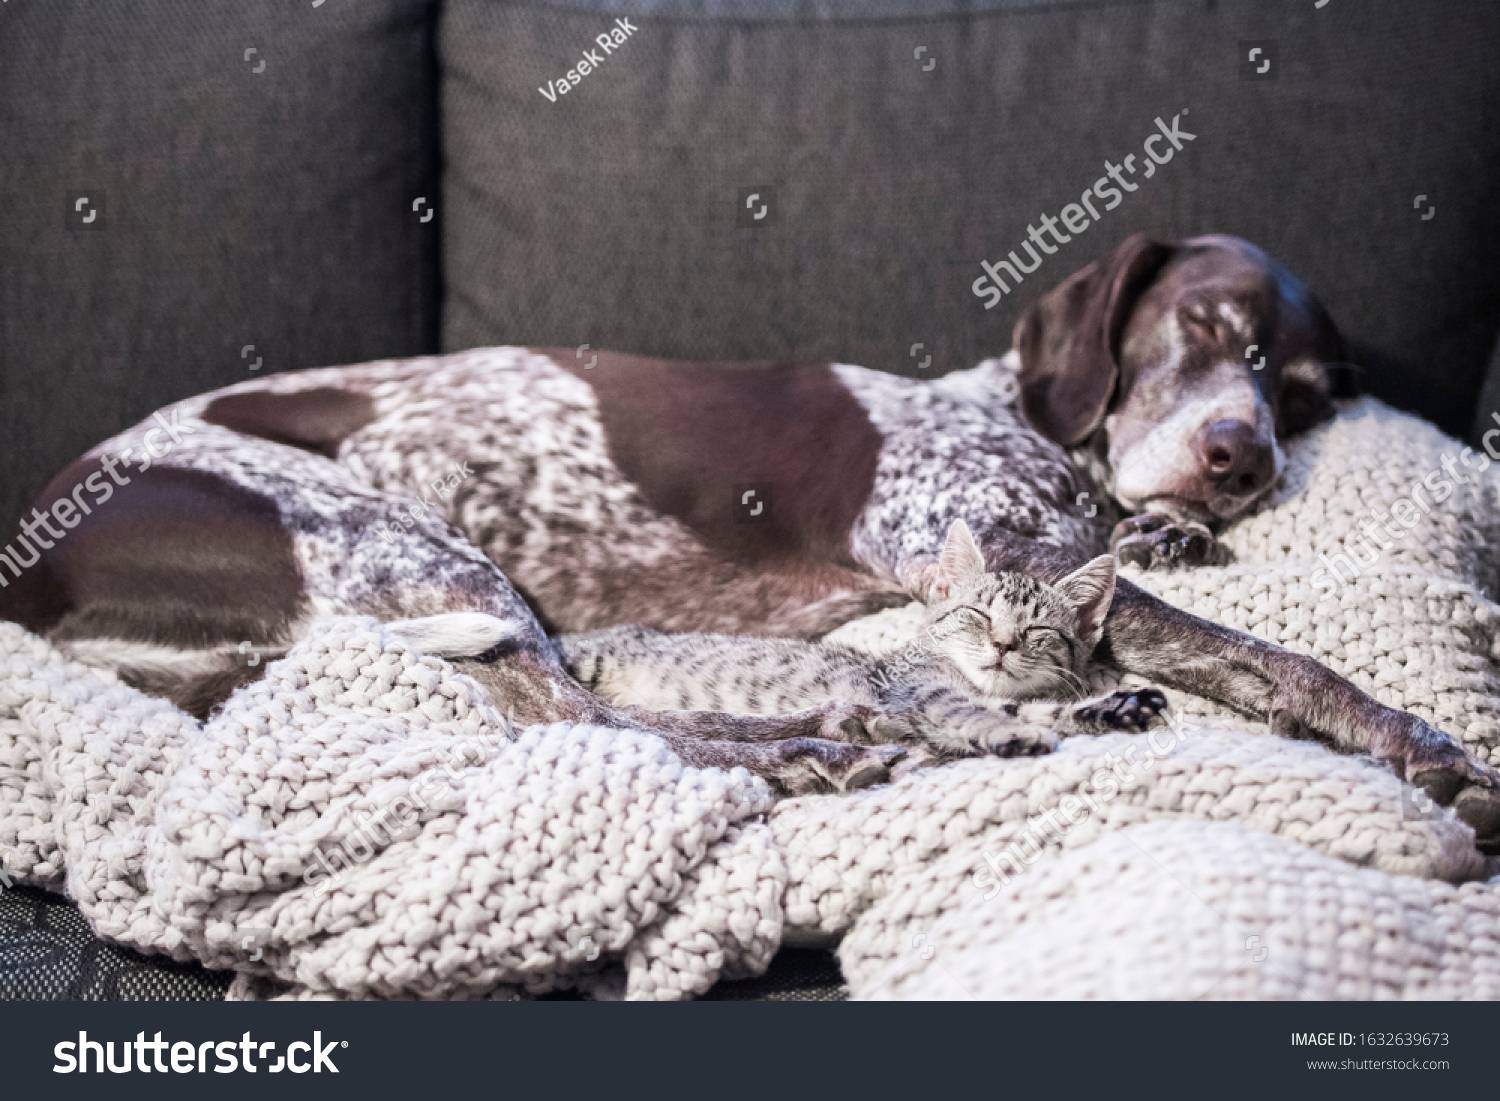 Dog and small kitten sleeping together as friends on a sofa #1632639673